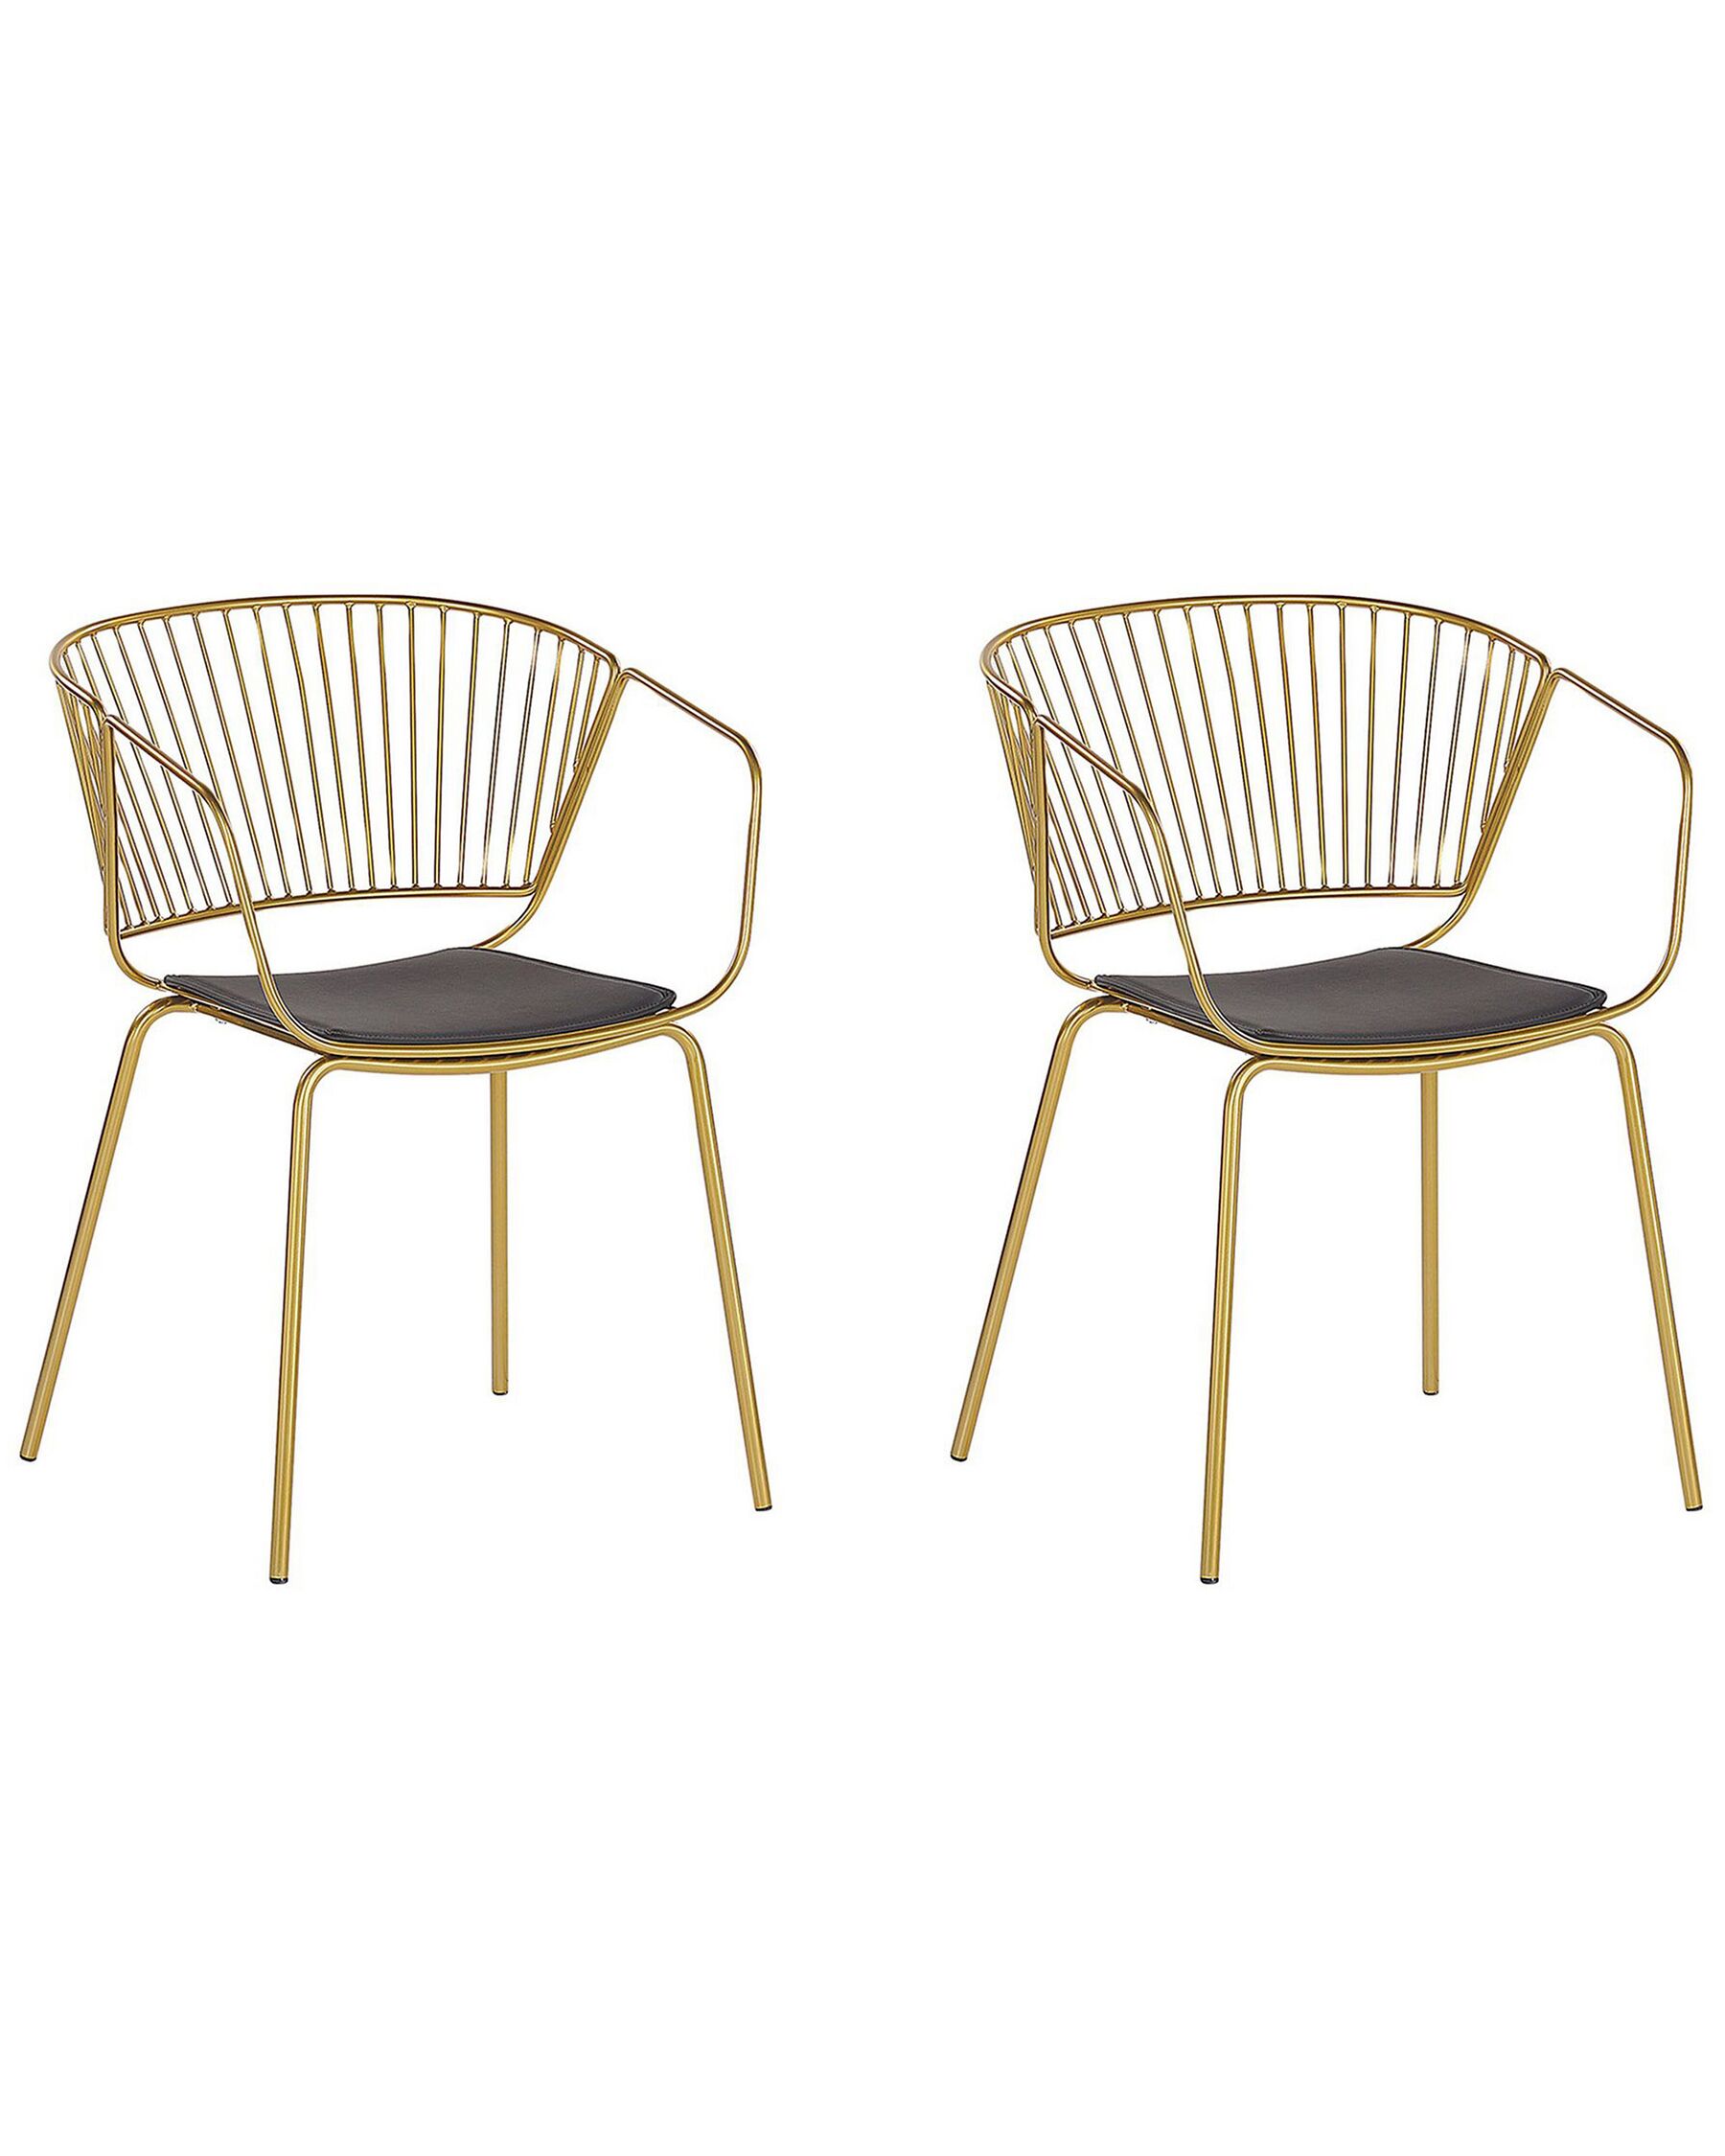 Set of 2 Metal Dining Chairs Gold RIGBY_775523